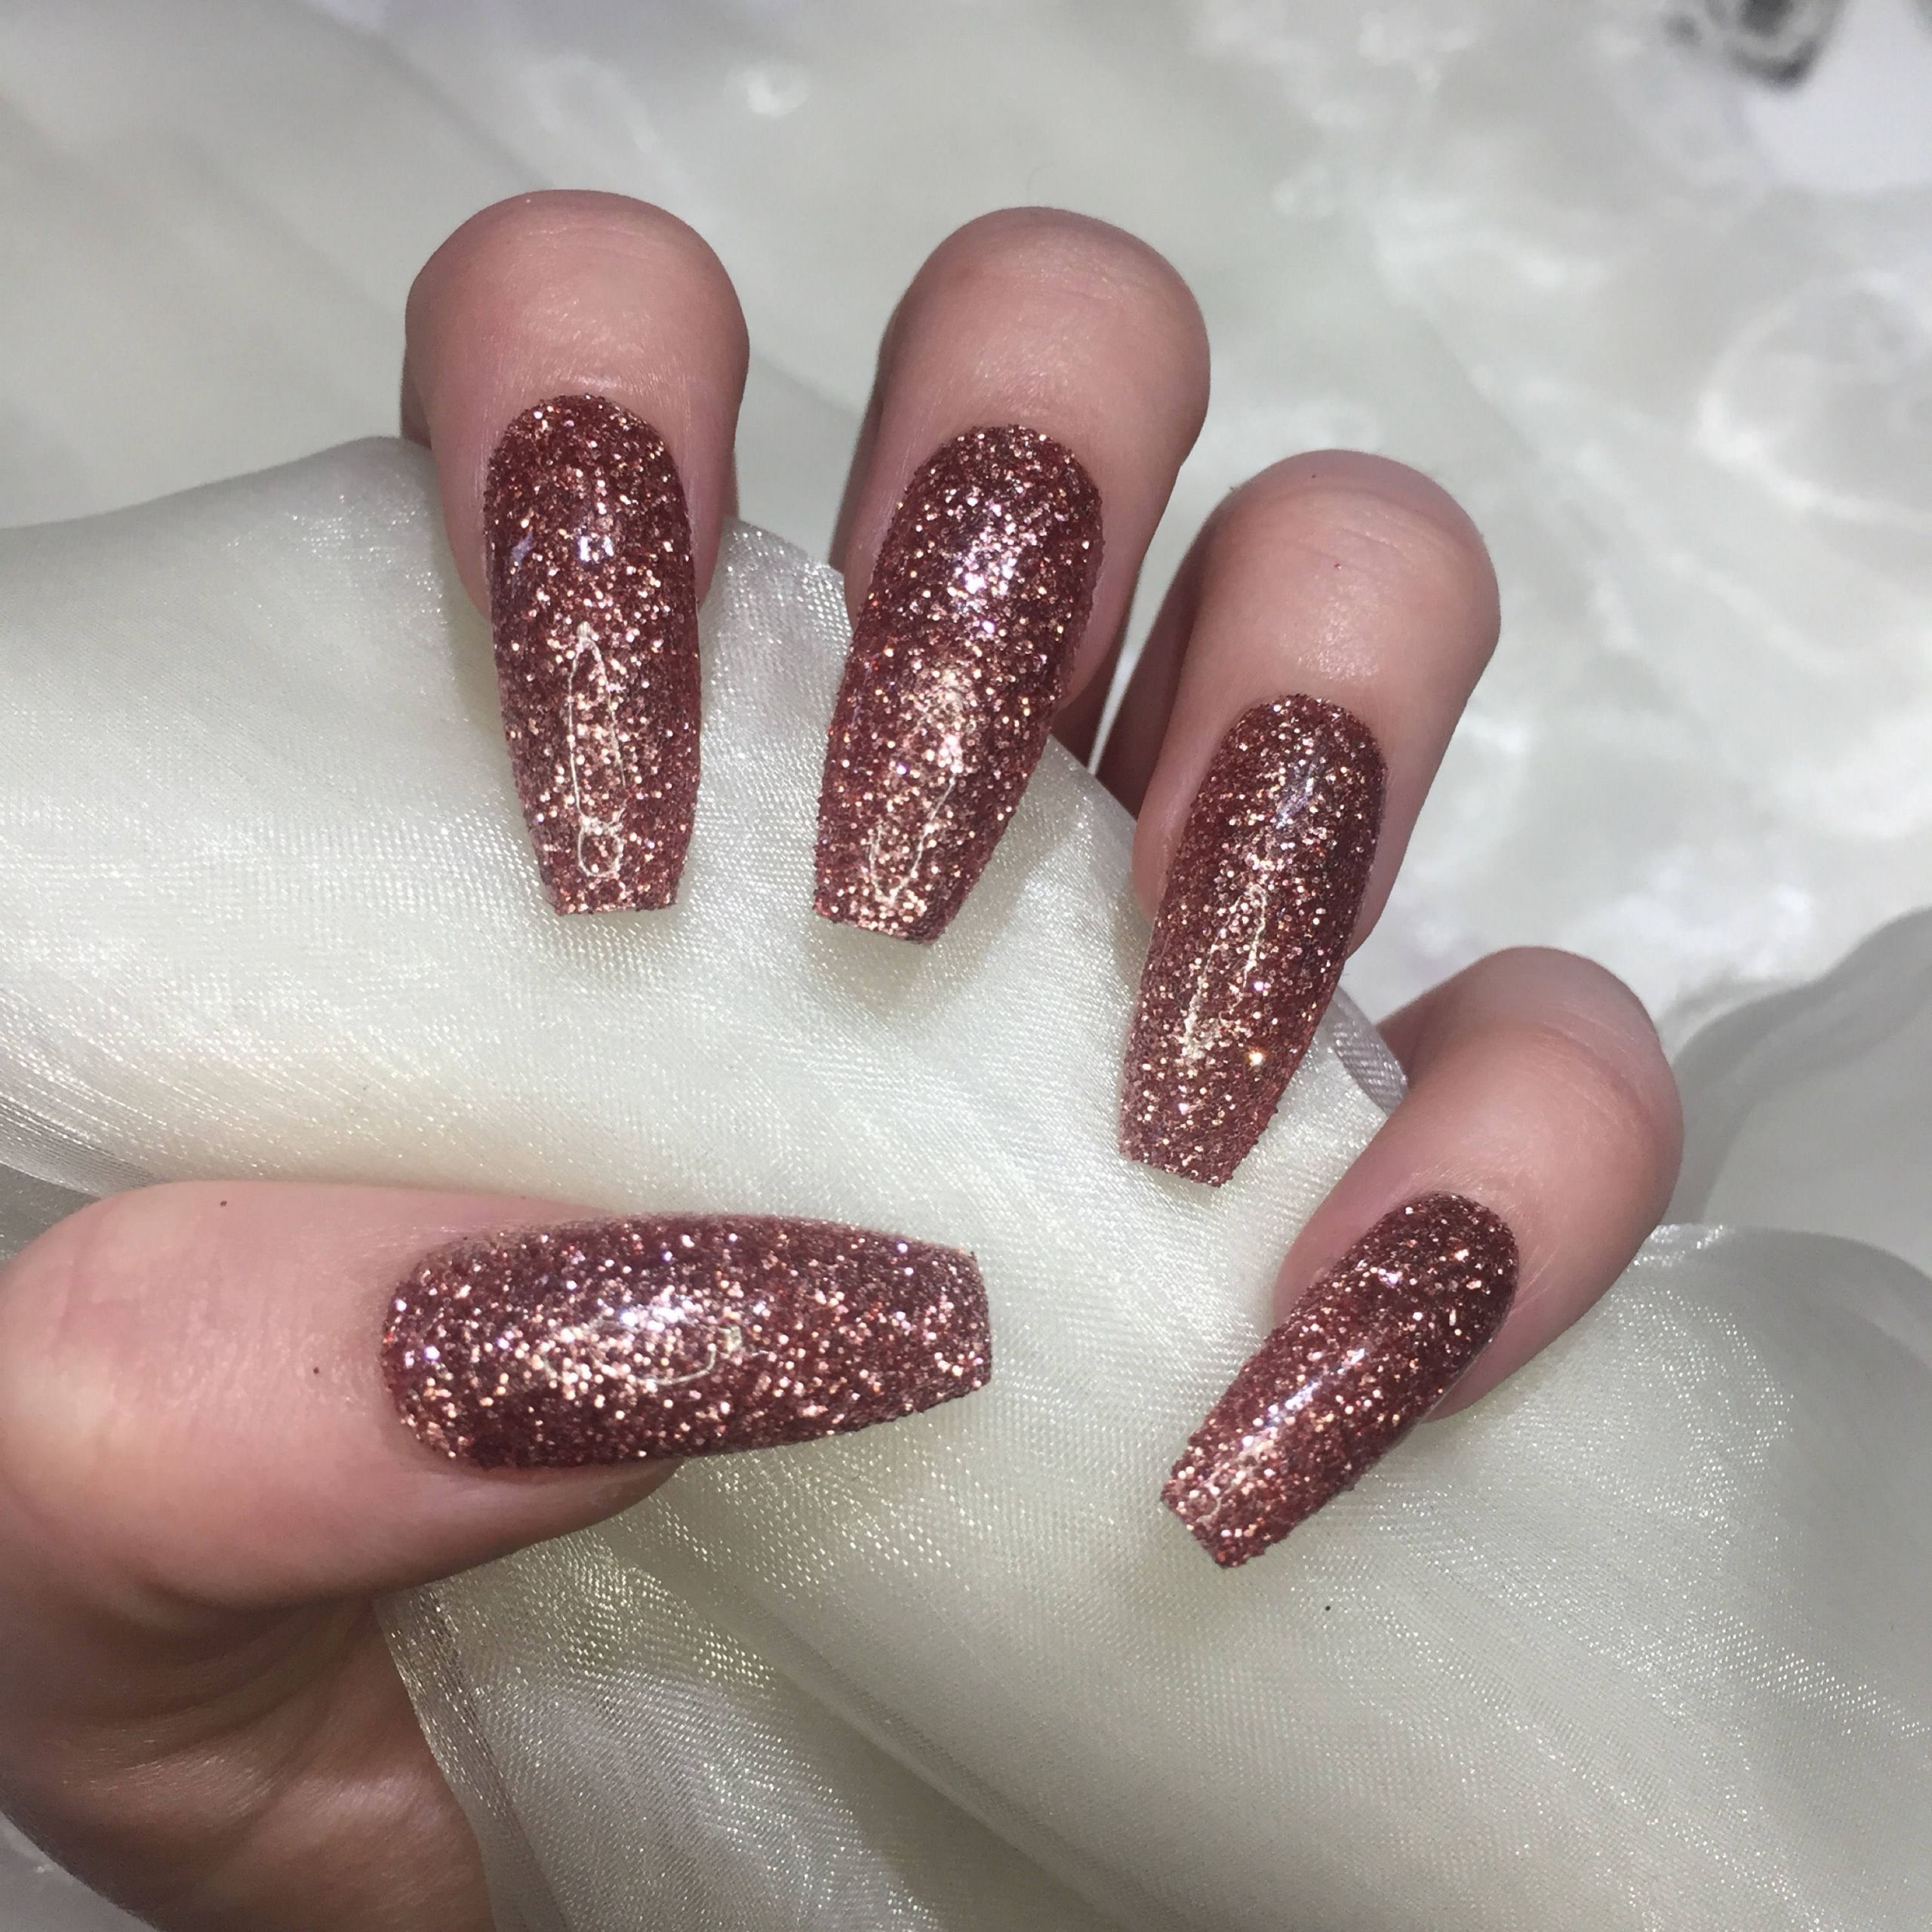 Coffin Glitter Nails
 Extra Long Coffin Rose Gold Glitter Coffin False Nails